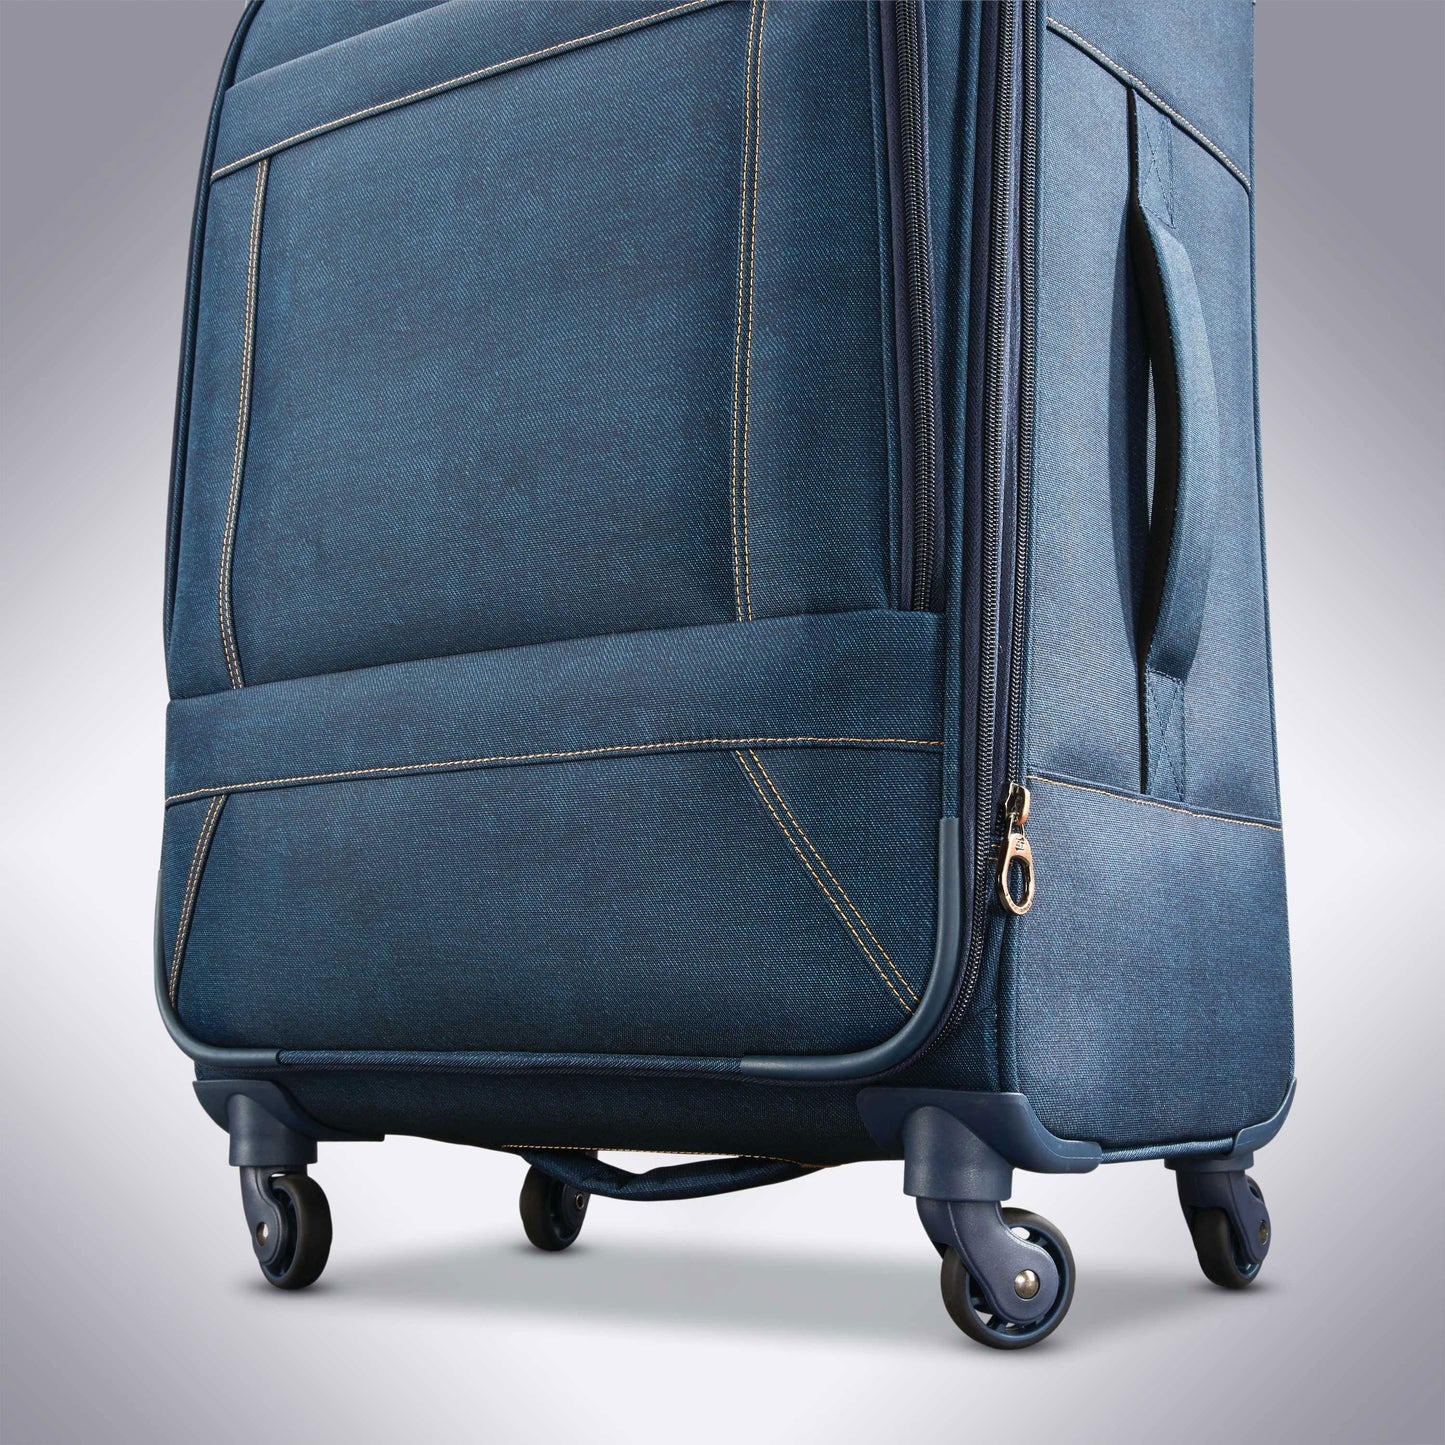 American Tourister Belle Voyage 25" Spinner